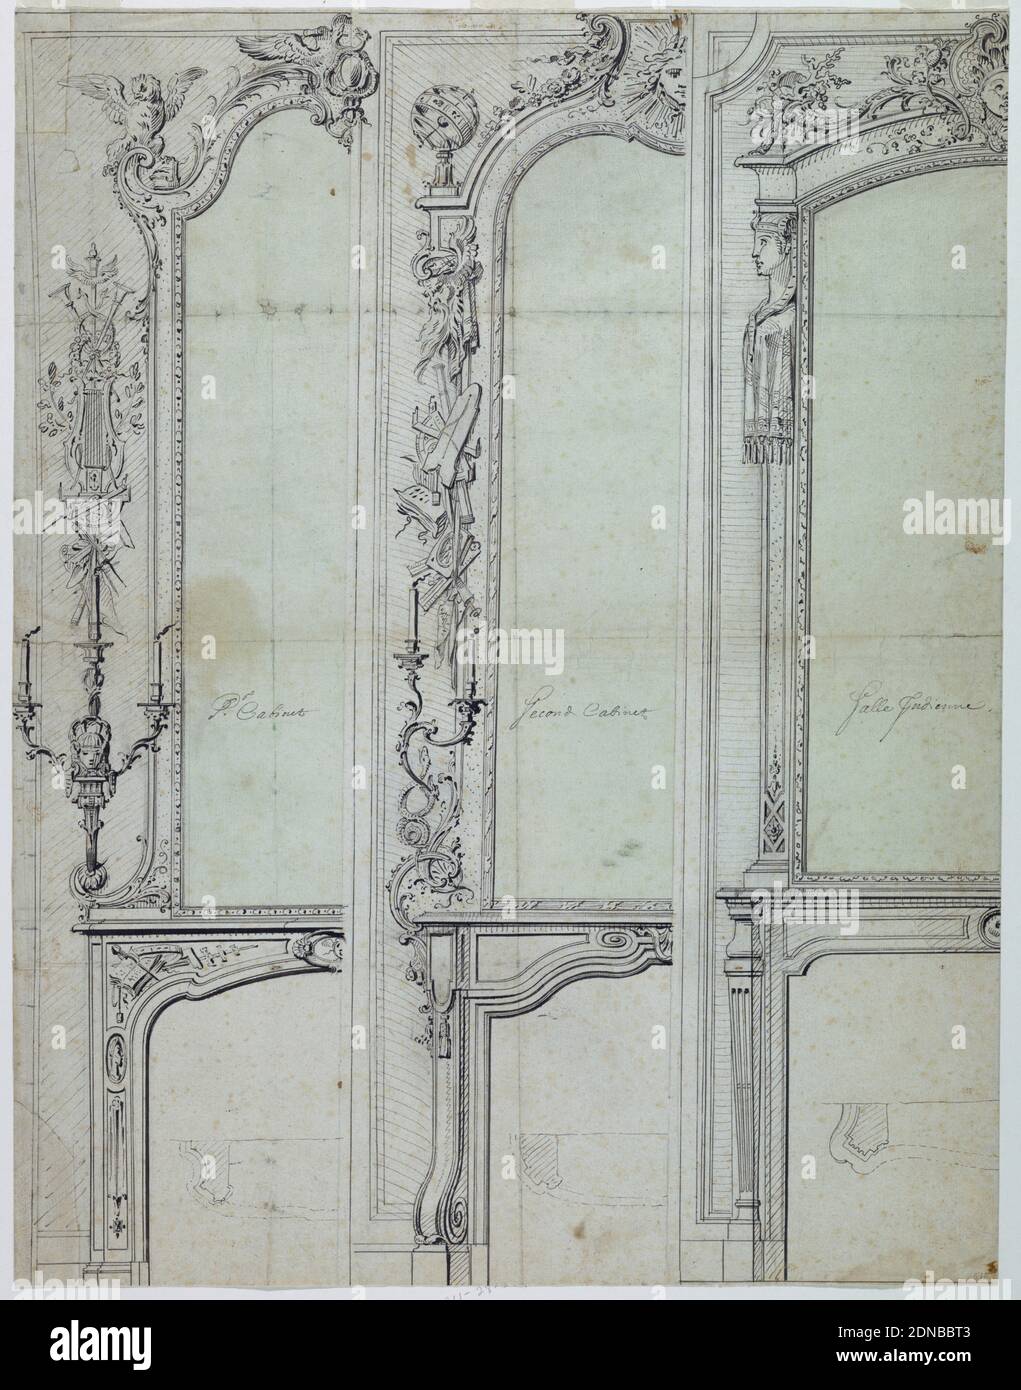 Designs for a Mantelpieces, Gilles-Marie Oppenord, French, 1672–1742, Pen and black ink, pale green wash, over black chalk, Three left halves of a mantelpiece. At left, 'pr. Cabinet' includes a pair of snakes before a winged escutcheon top center, an eagle, top left. A candel in the wall panel. Center, 'Second Cabinet' includes a sunface top center. Candle bracket with two candles supported by two snakes and scientific symbols adorn the wall panel. At right, 'Salle Jud'enne' includes a pilaster with a bust of a woman with a diadem and a shawl., France, 1720, Drawing Stock Photo